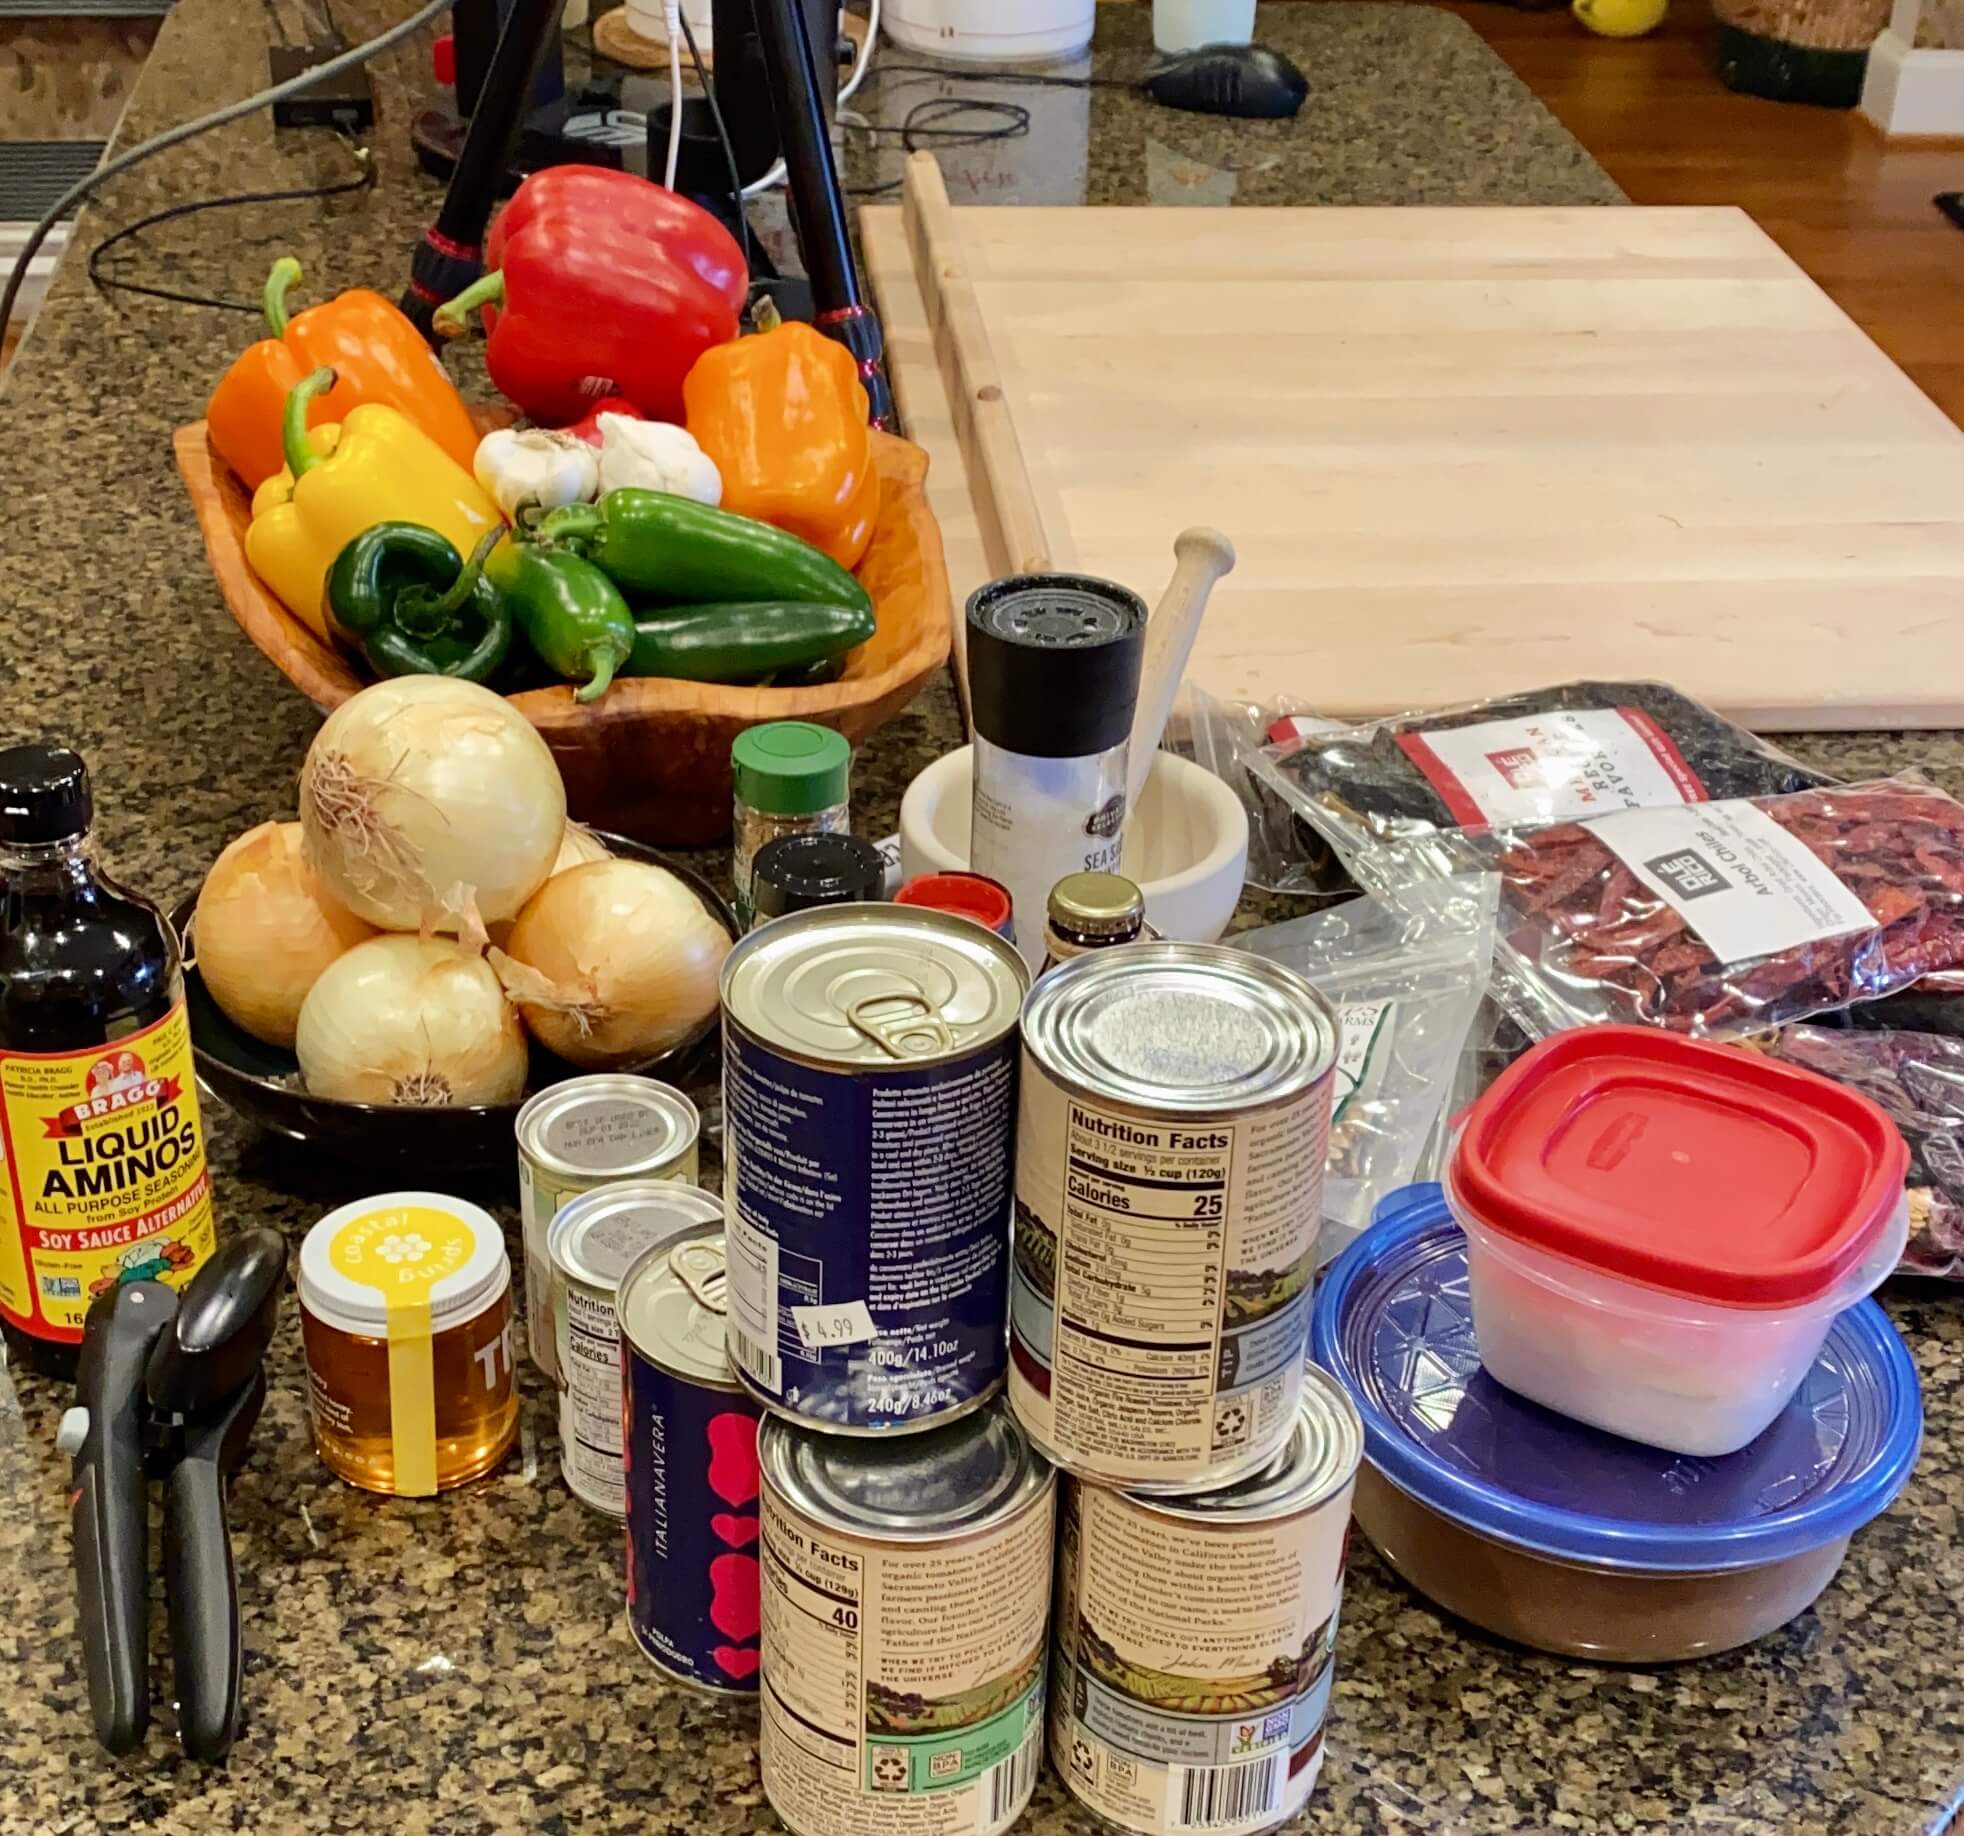 all the ingredients ready for cooking